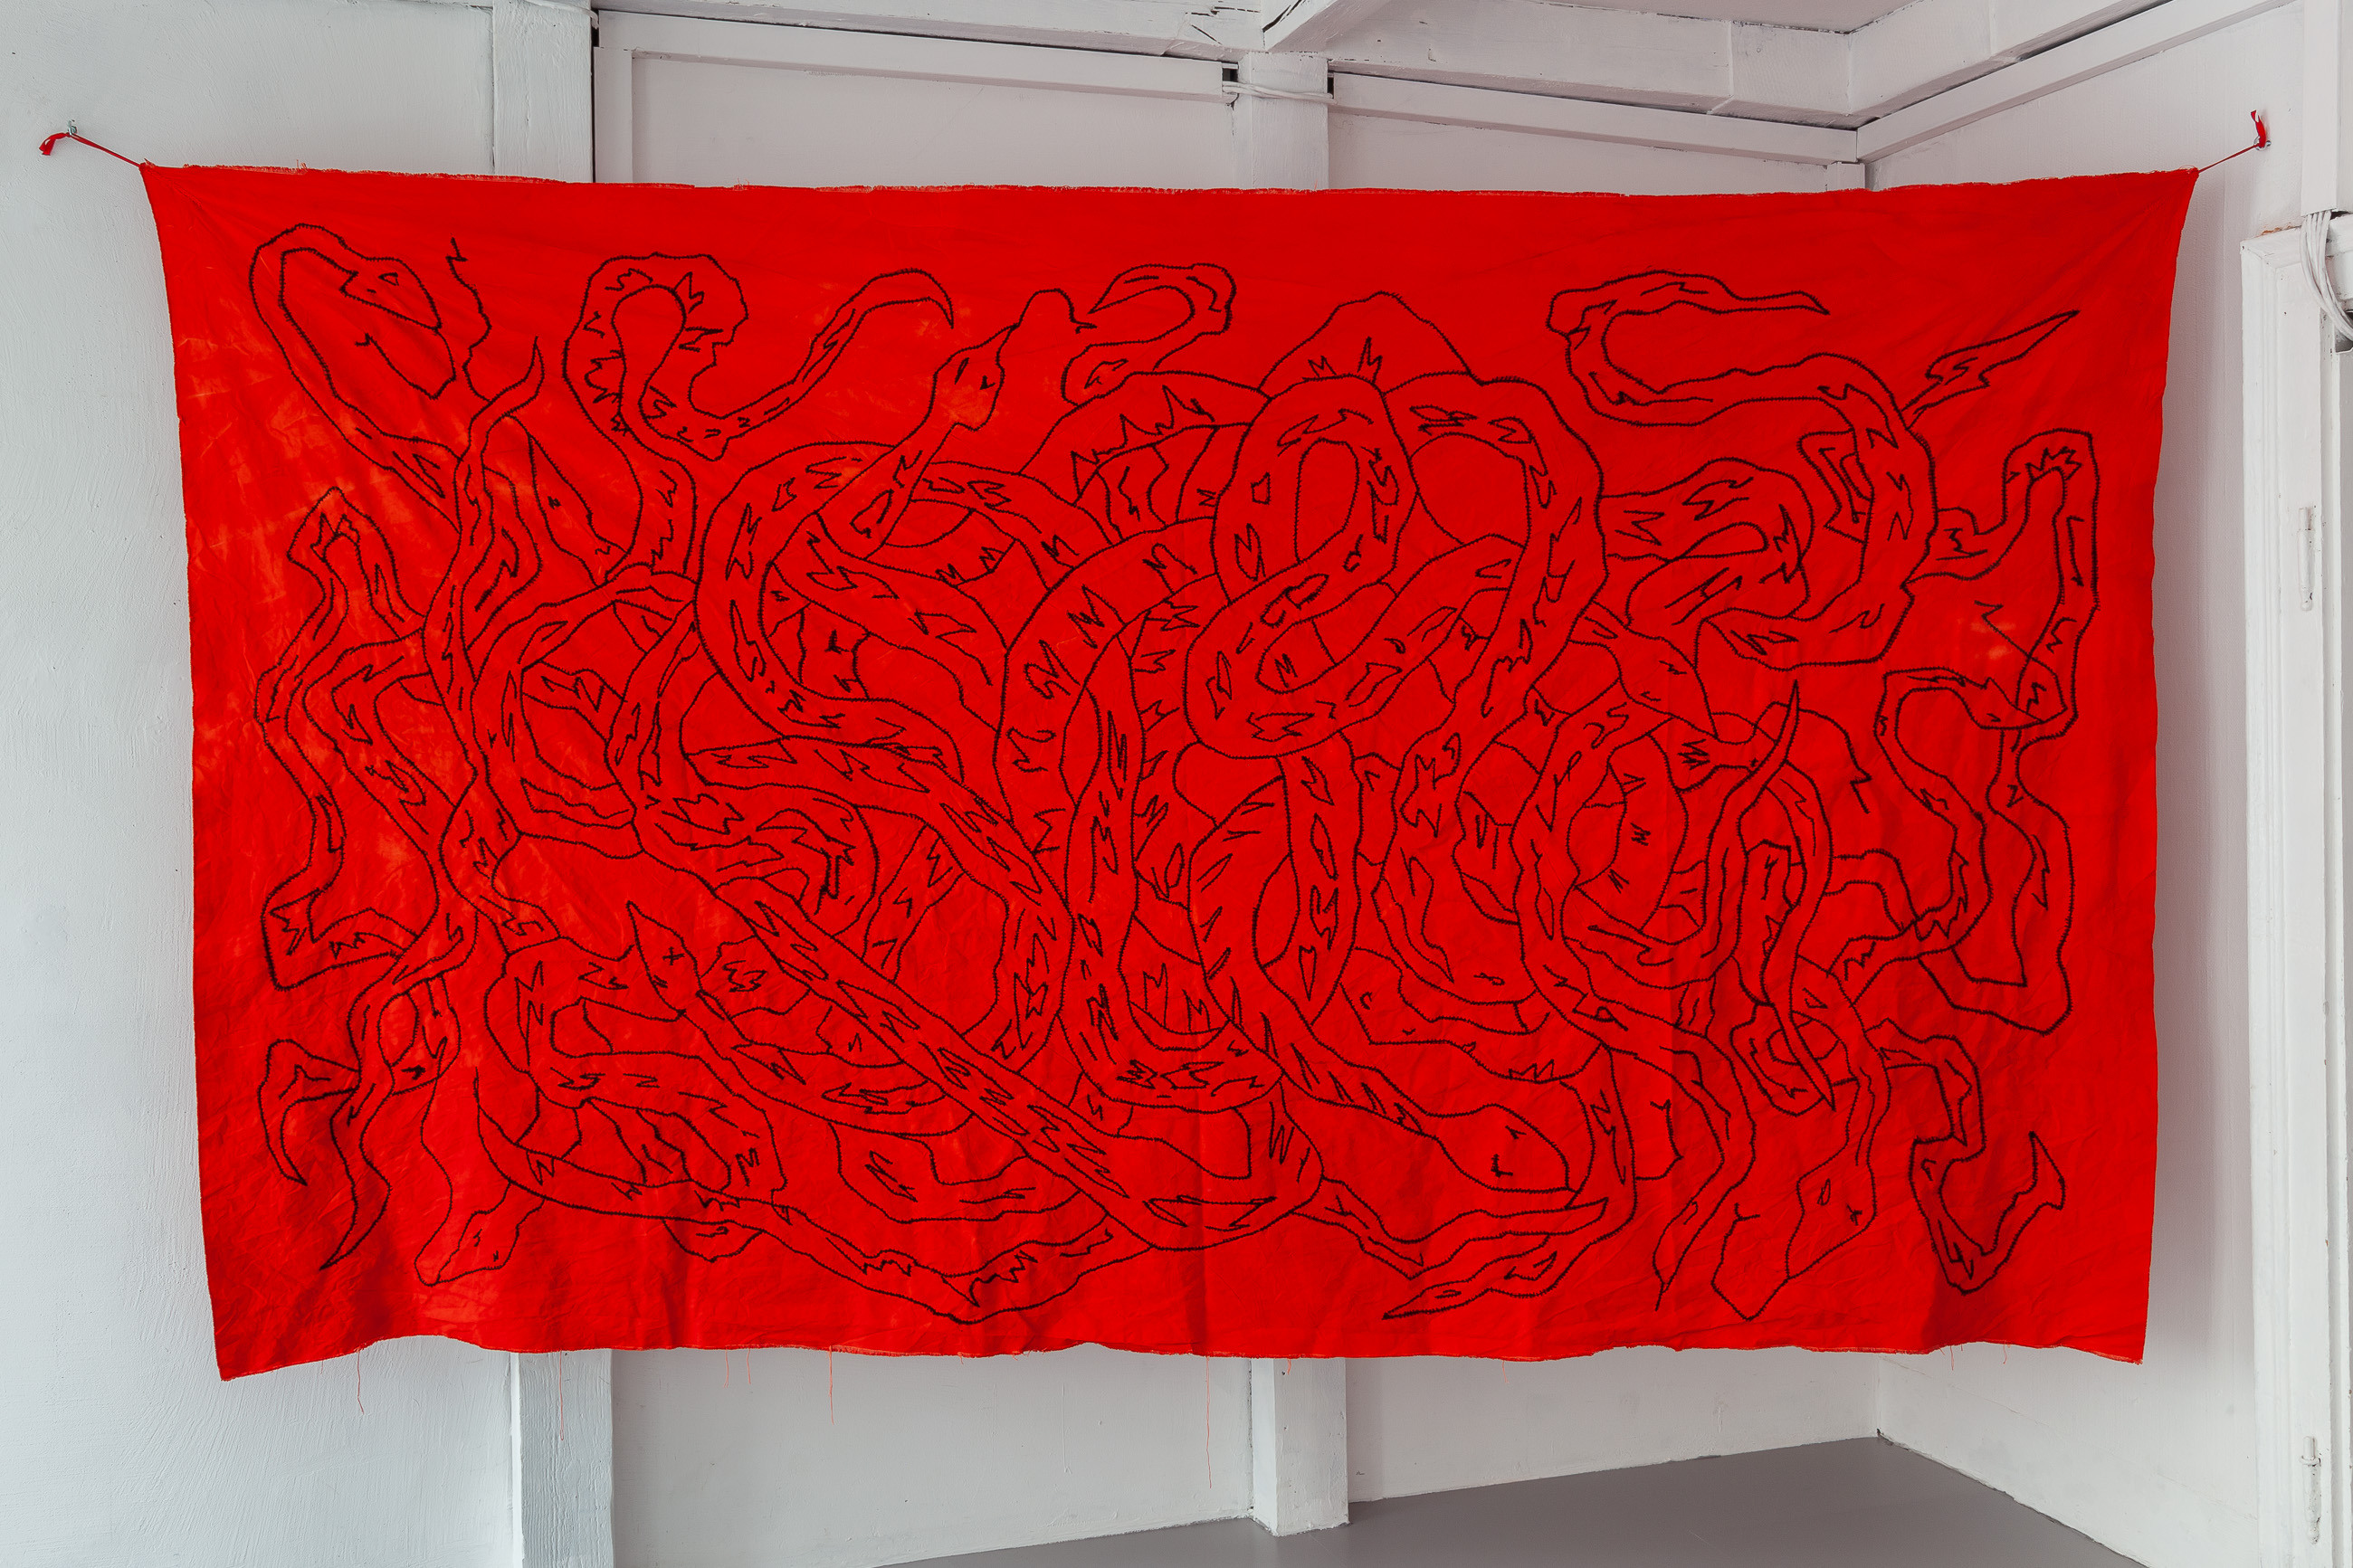 16 NicolÃ¡s Astorga, MY SHADOW TO YOUR FEET, embroidery on hand dyed cotton 300 x 200 cm, 2021Â 